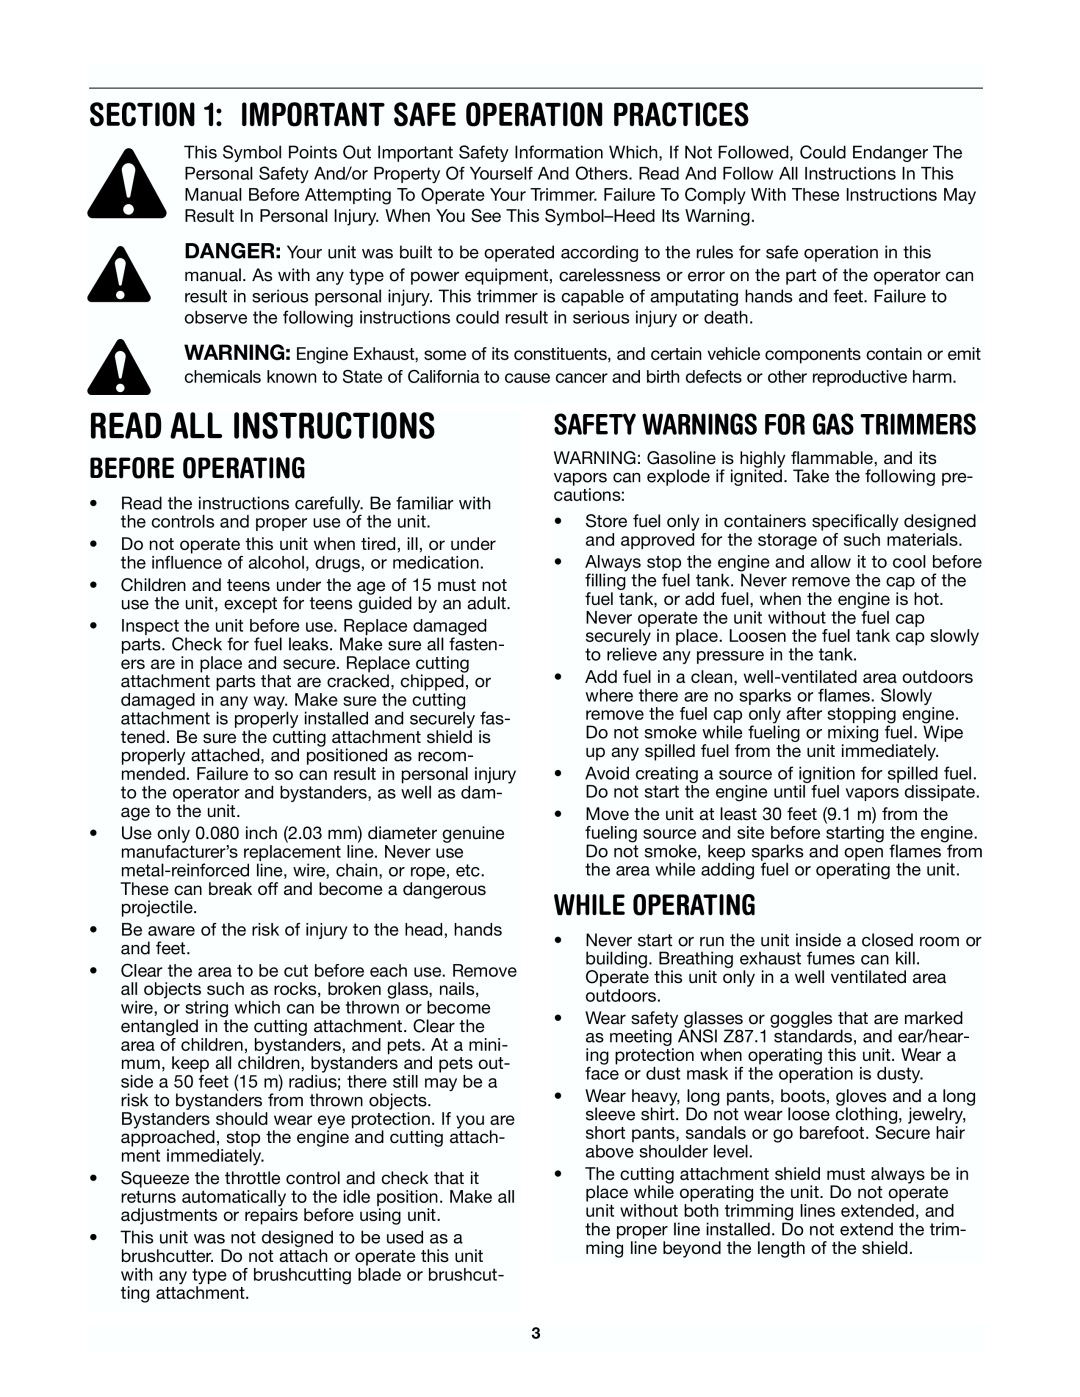 Yard Machines 41AD-280G000 Important Safe Operation Practices, Before Operating, While Operating, Read All Instructions 